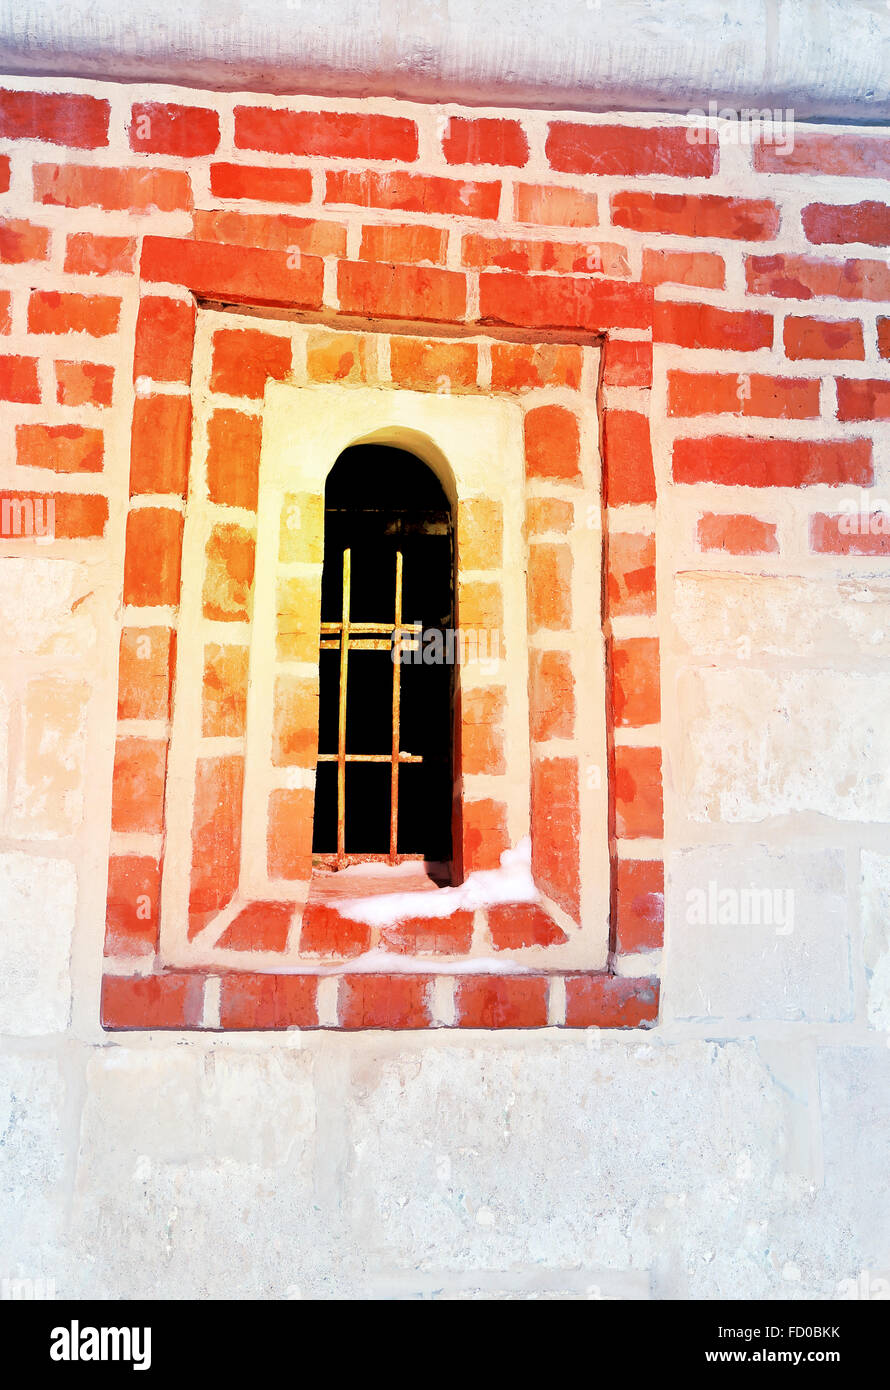 Small Windows in the fortress of red brick photographed close up Stock Photo